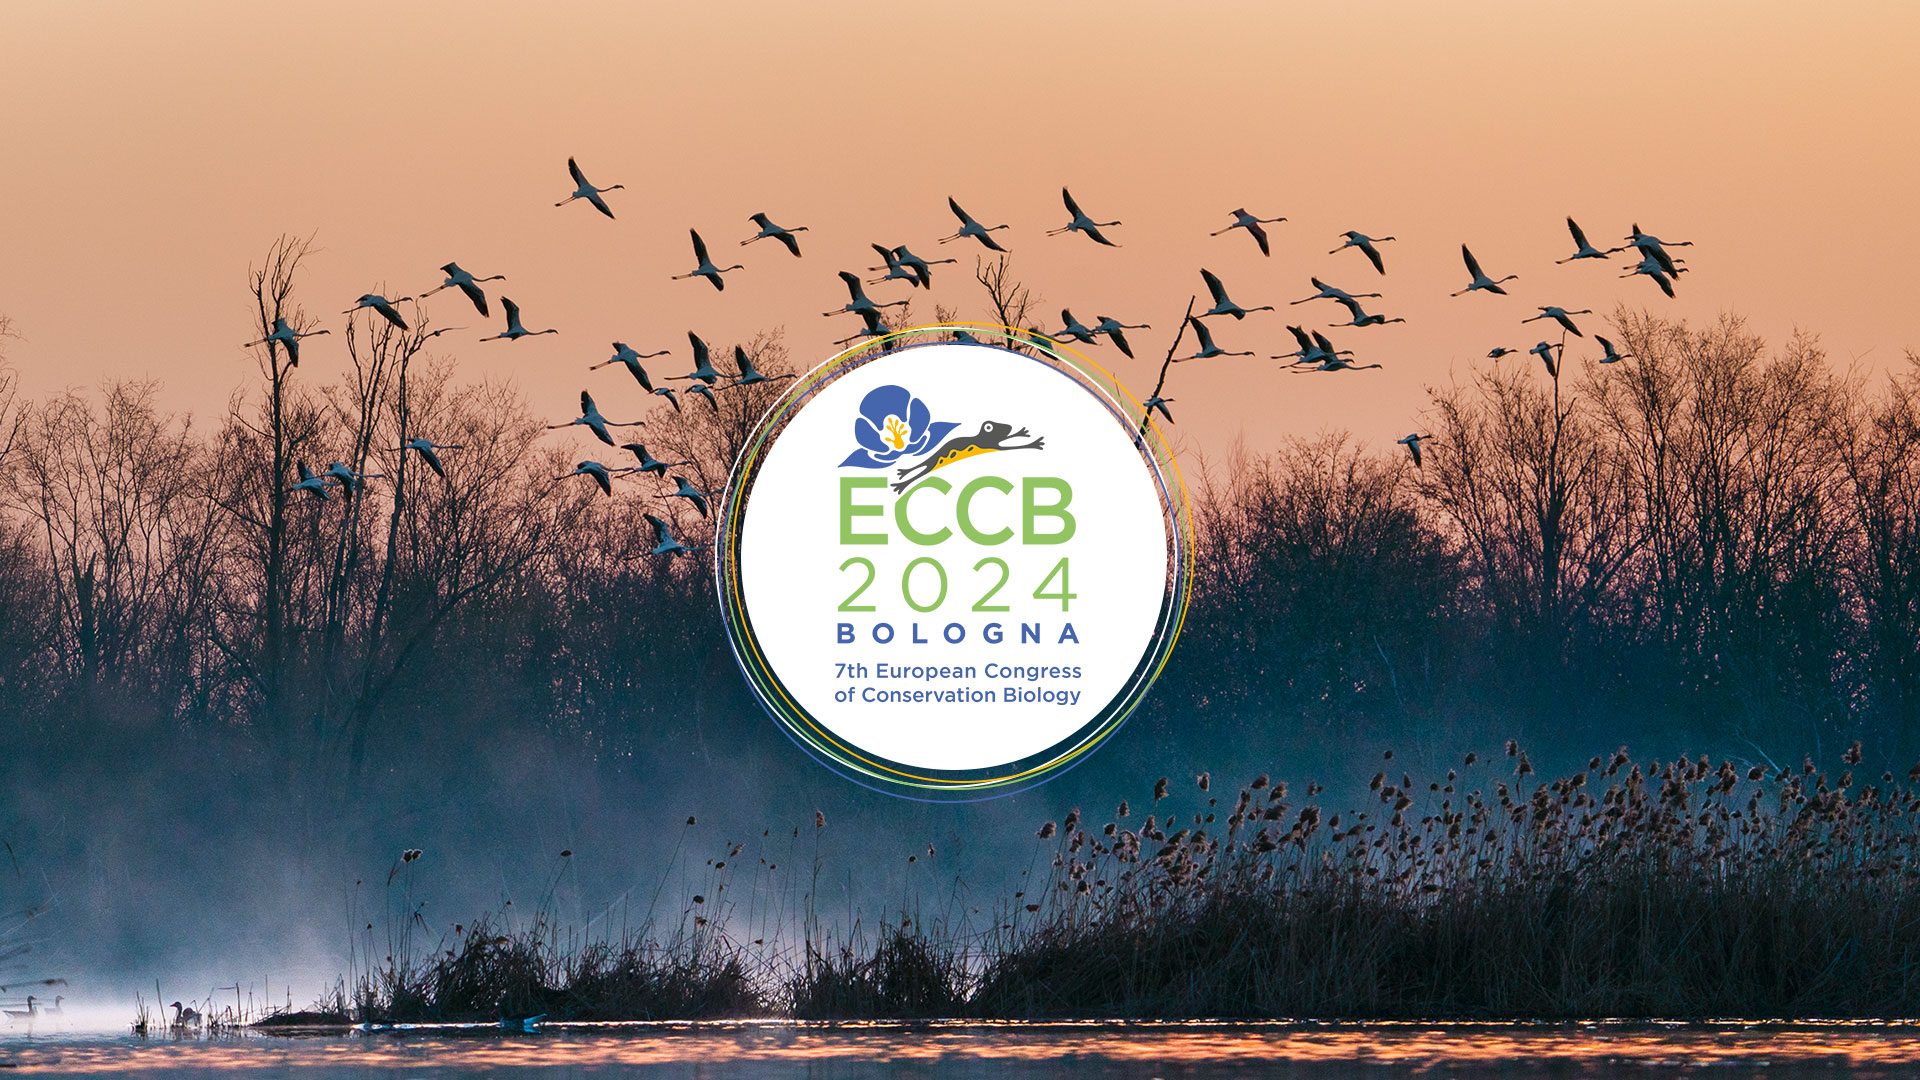 The banner of ECCB 2024